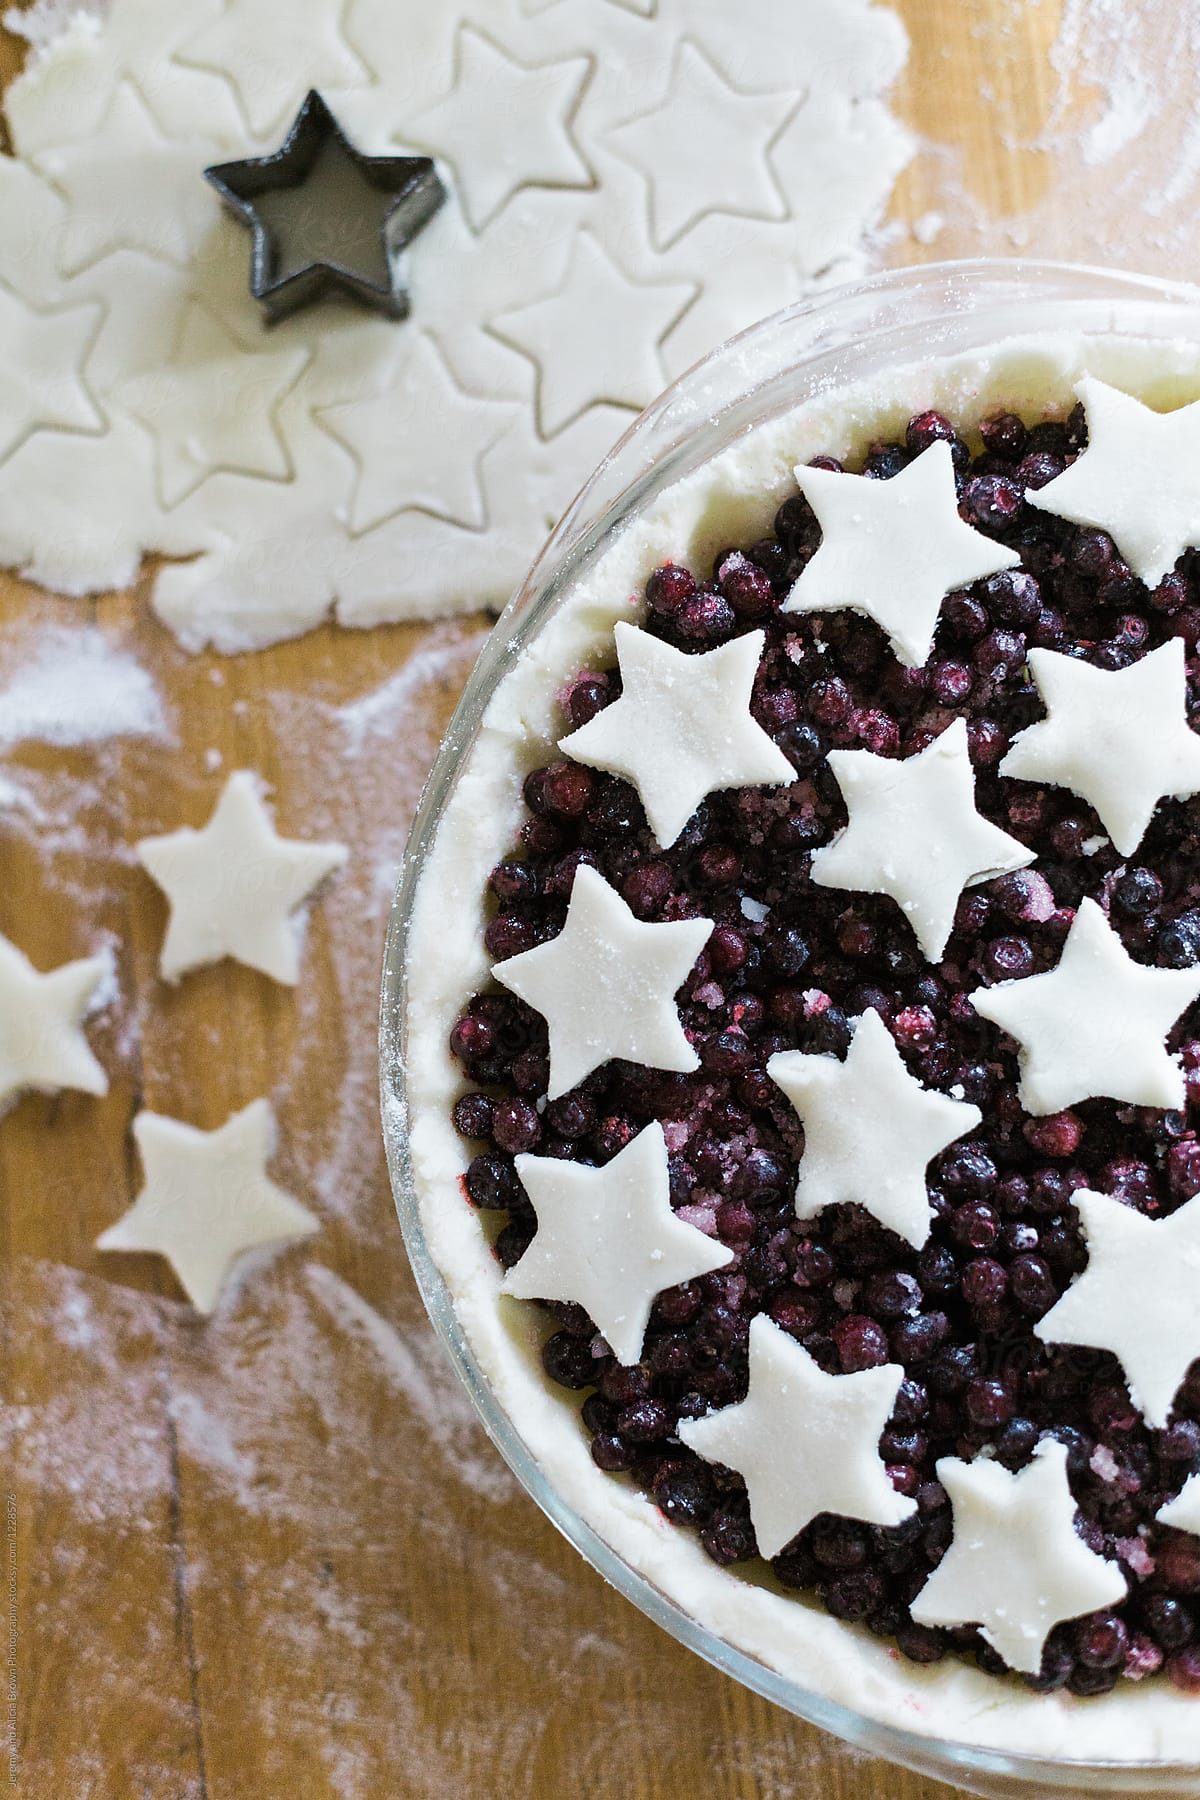 Huckleberry pie covered in stars